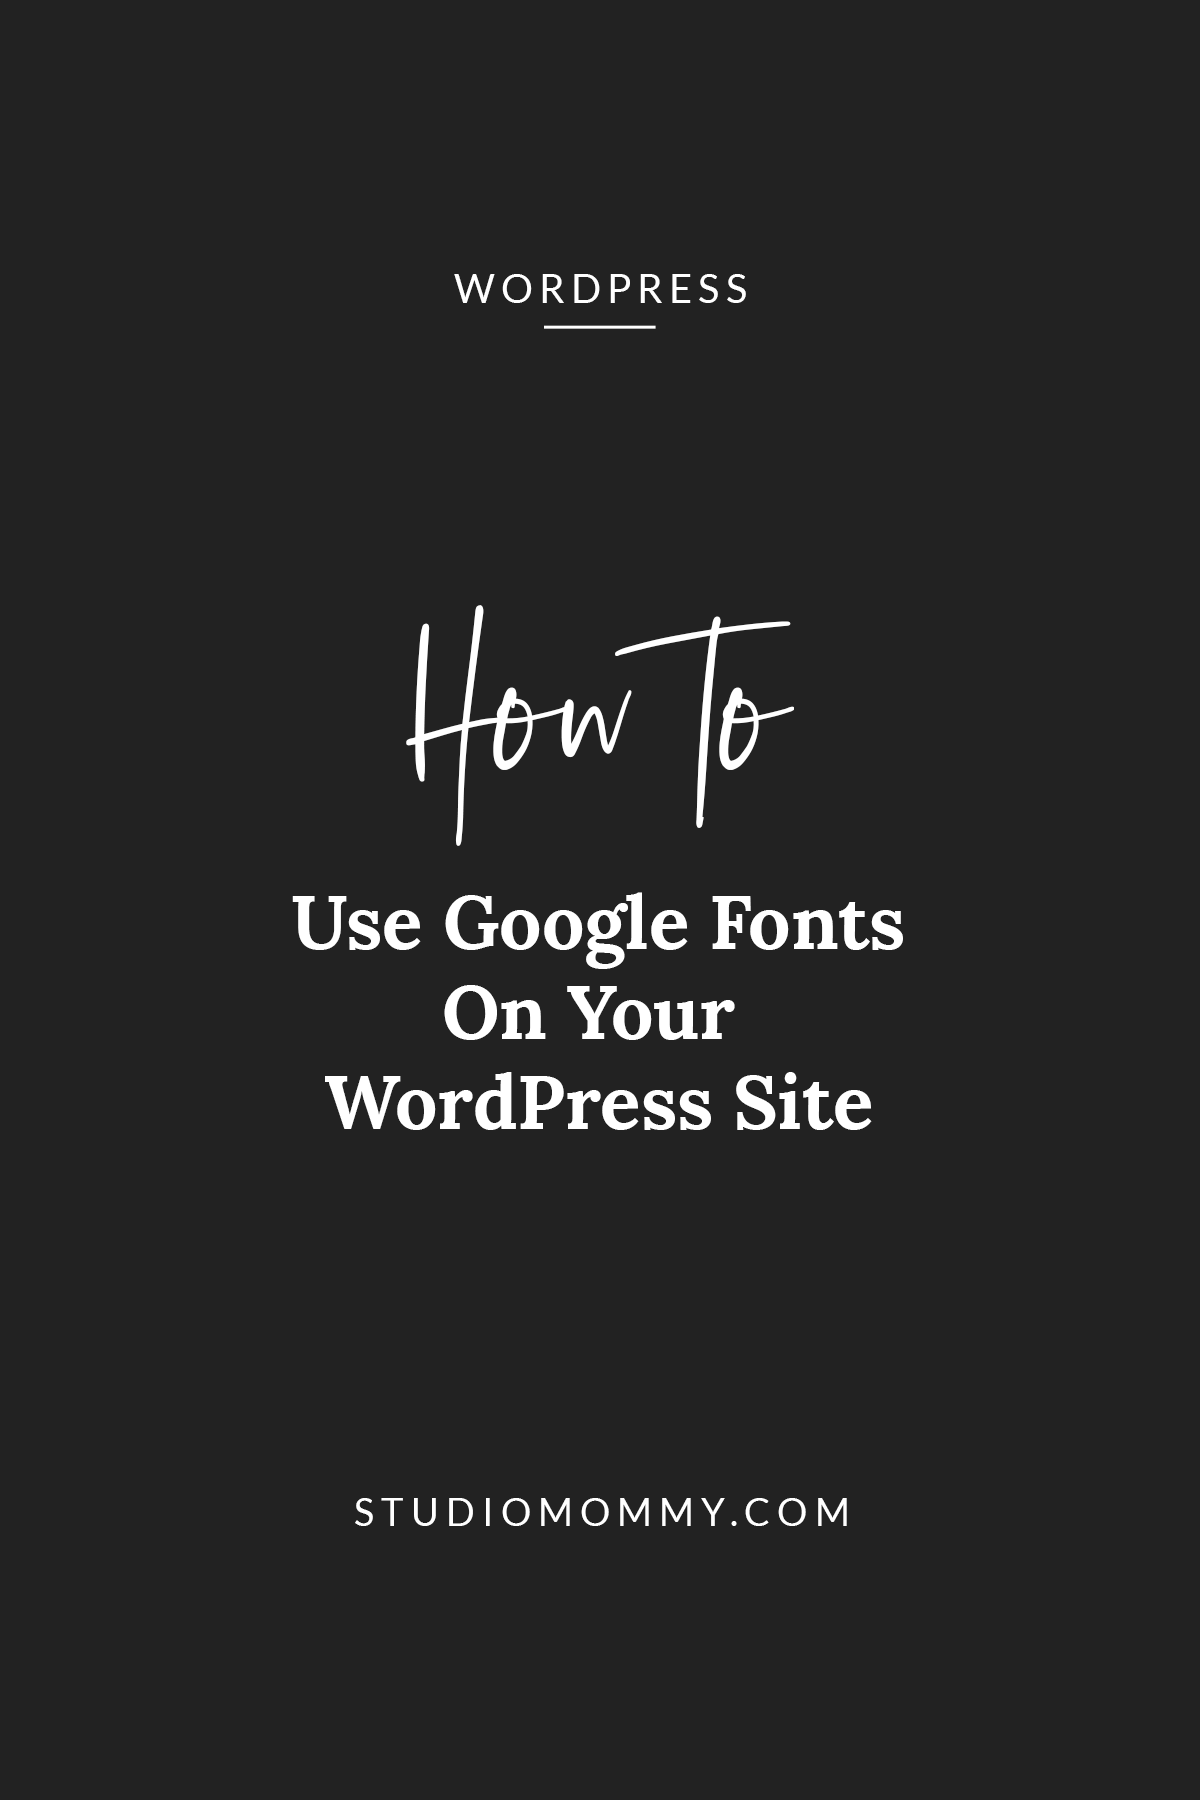 How to use Google Fonts @studiomommy